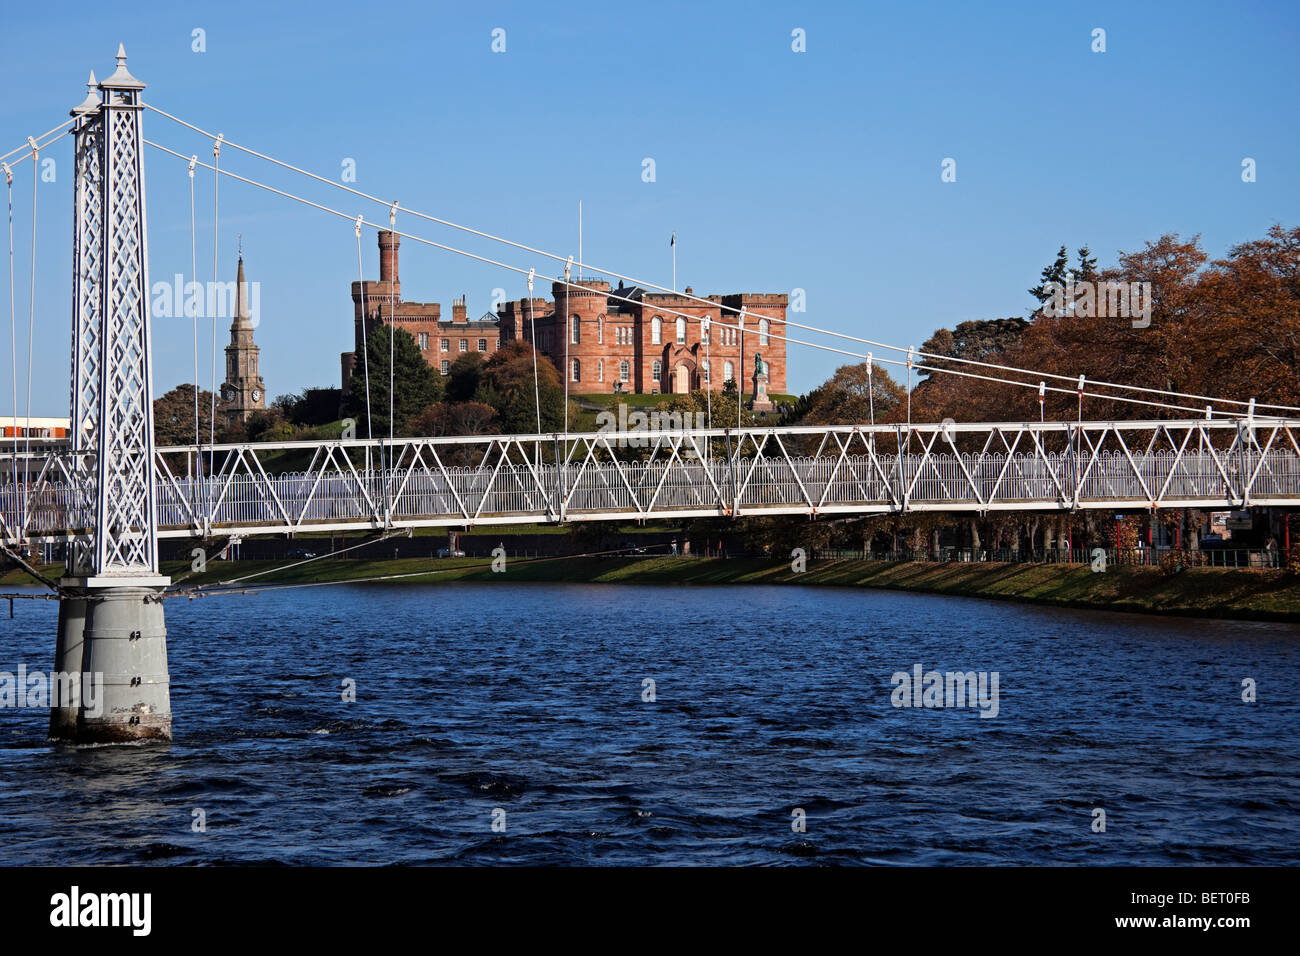 Footbridge spanning the River Ness, with Inverness Castle in background Inverness-shire, Scotland UK Europe Stock Photo